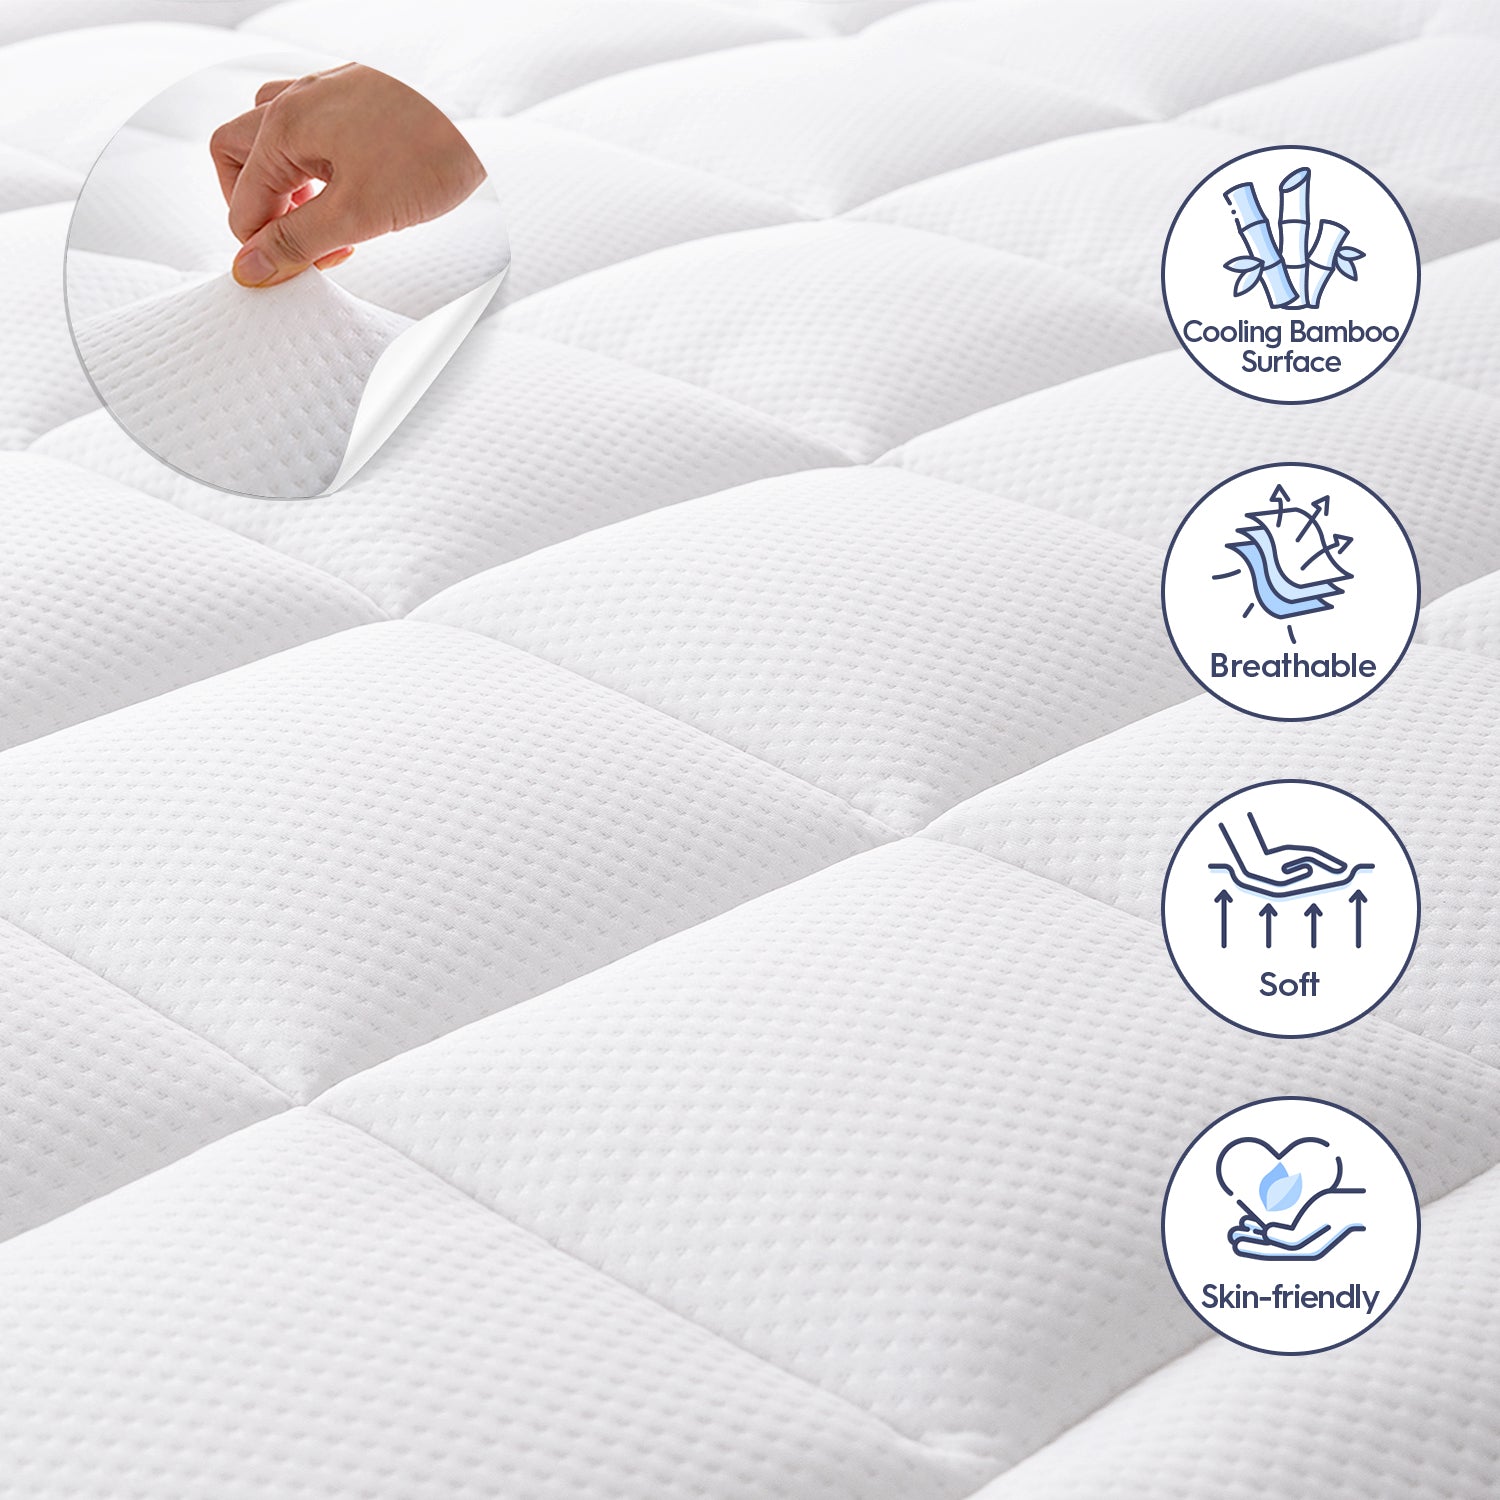 3 inch dual layer gel memory foam mattress topper plush cooling bamboo pillow top cover comfort support mattress pad with deep pocket back pain relief